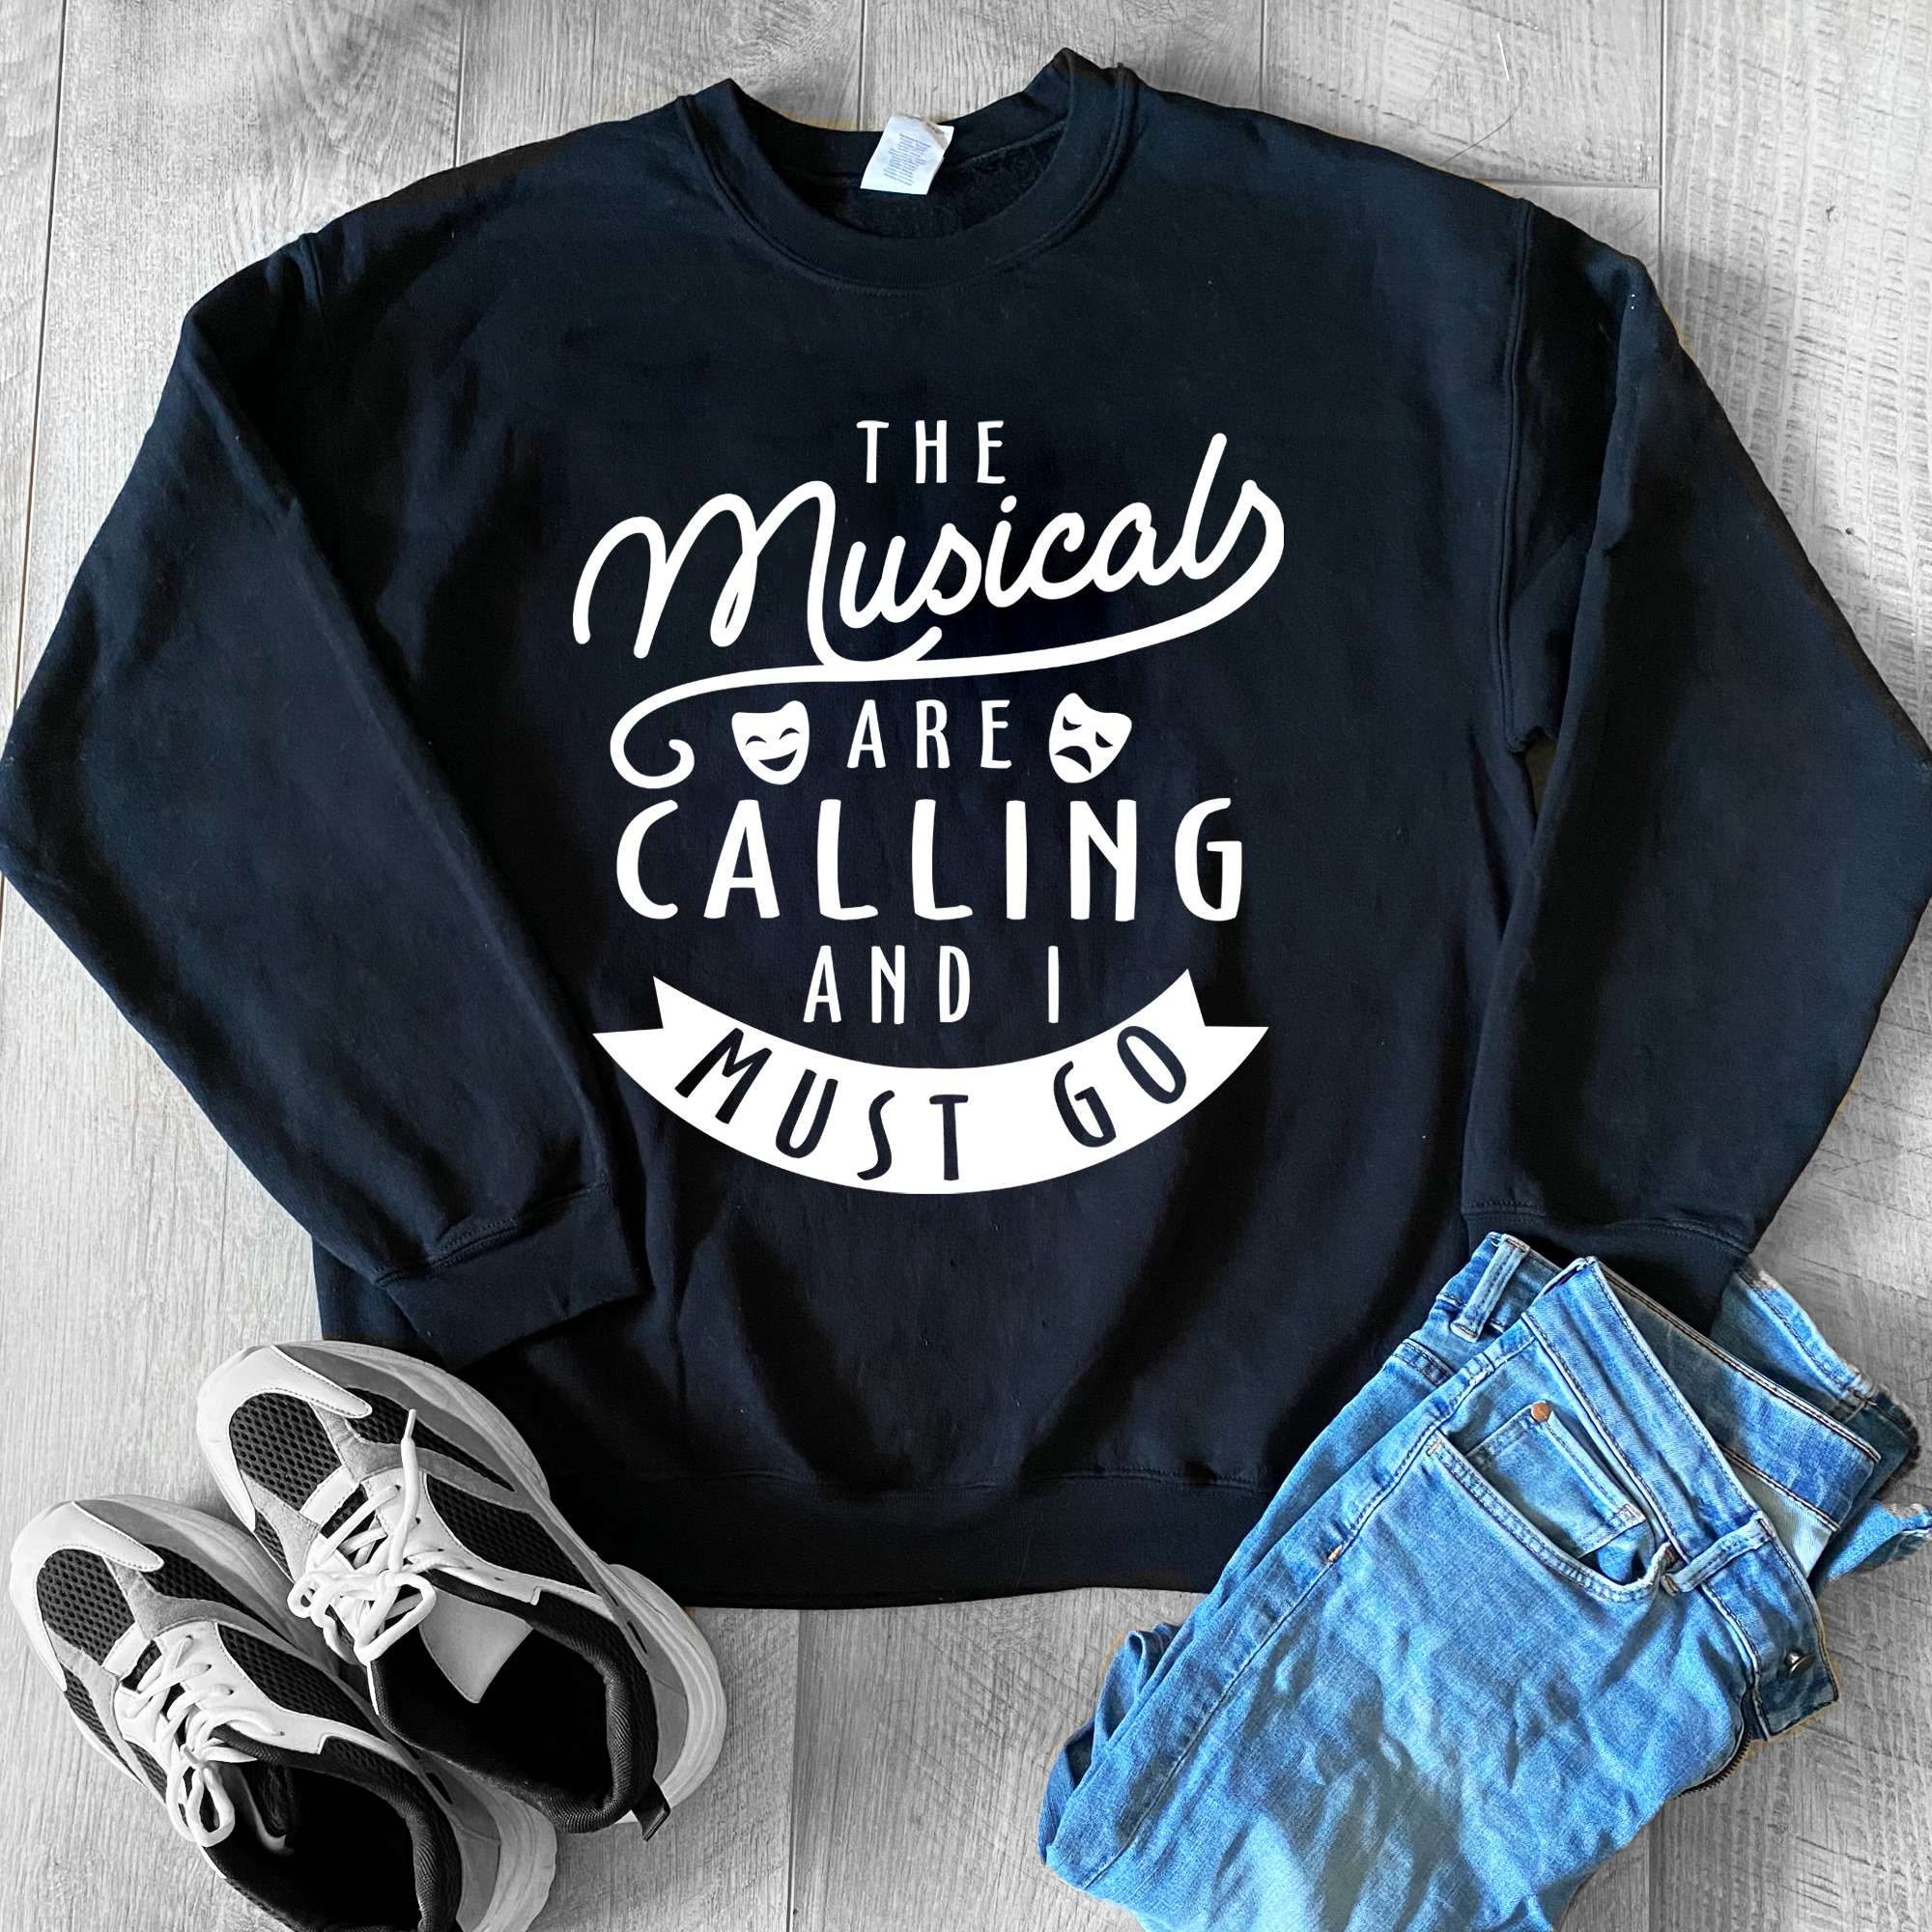 The musicals are calling and I must go - Music is calling, music the passion